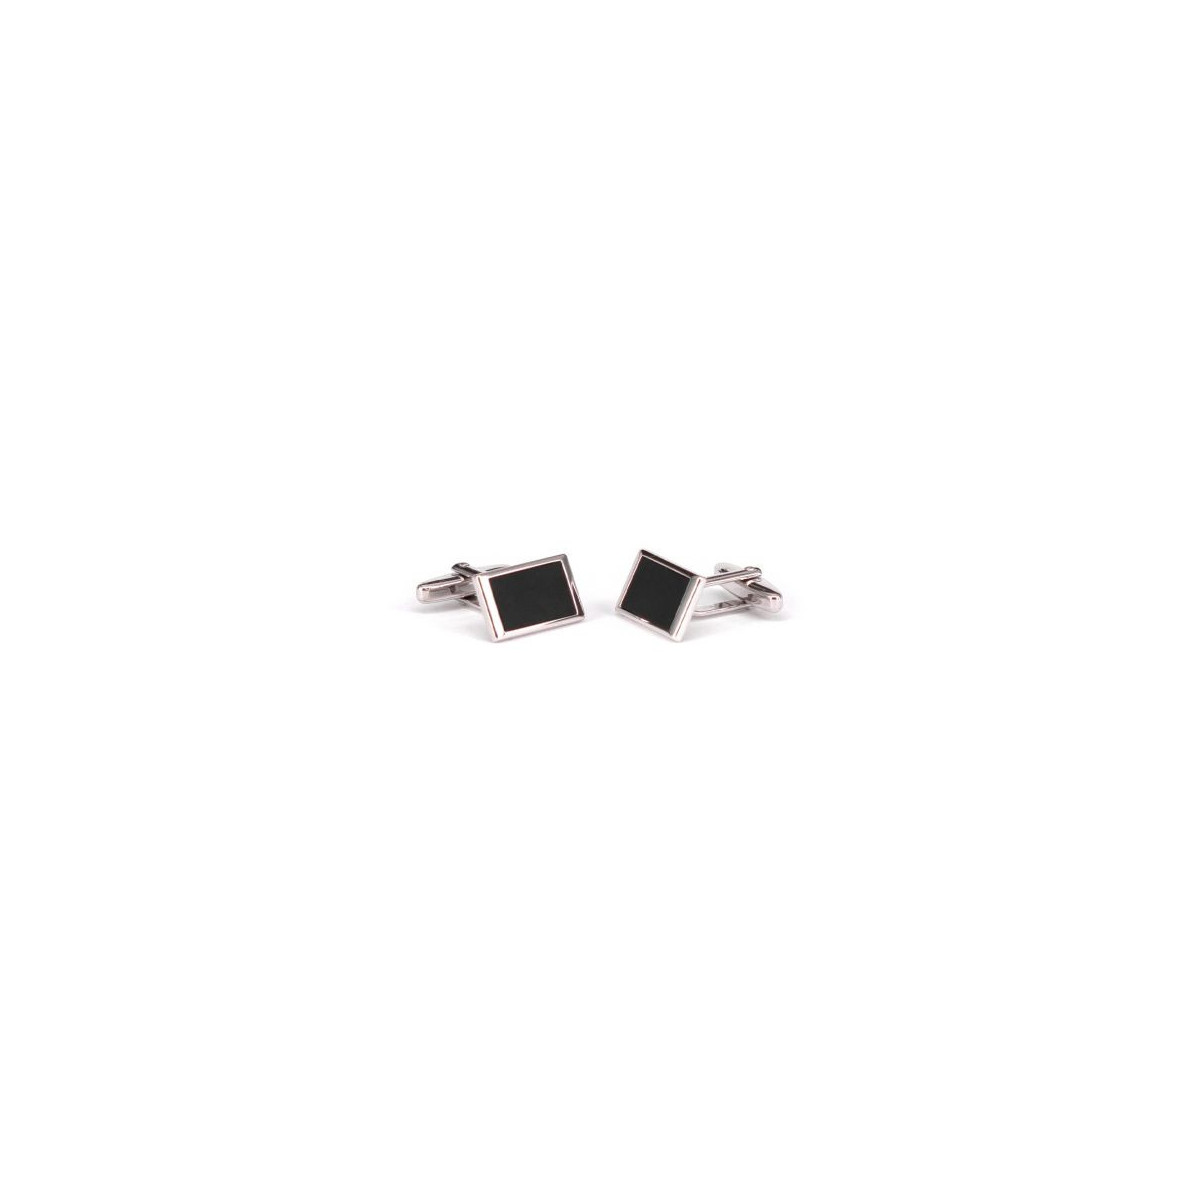 CUFFLINKS MADE OF SILVER AND RECTANGULAR ONYX